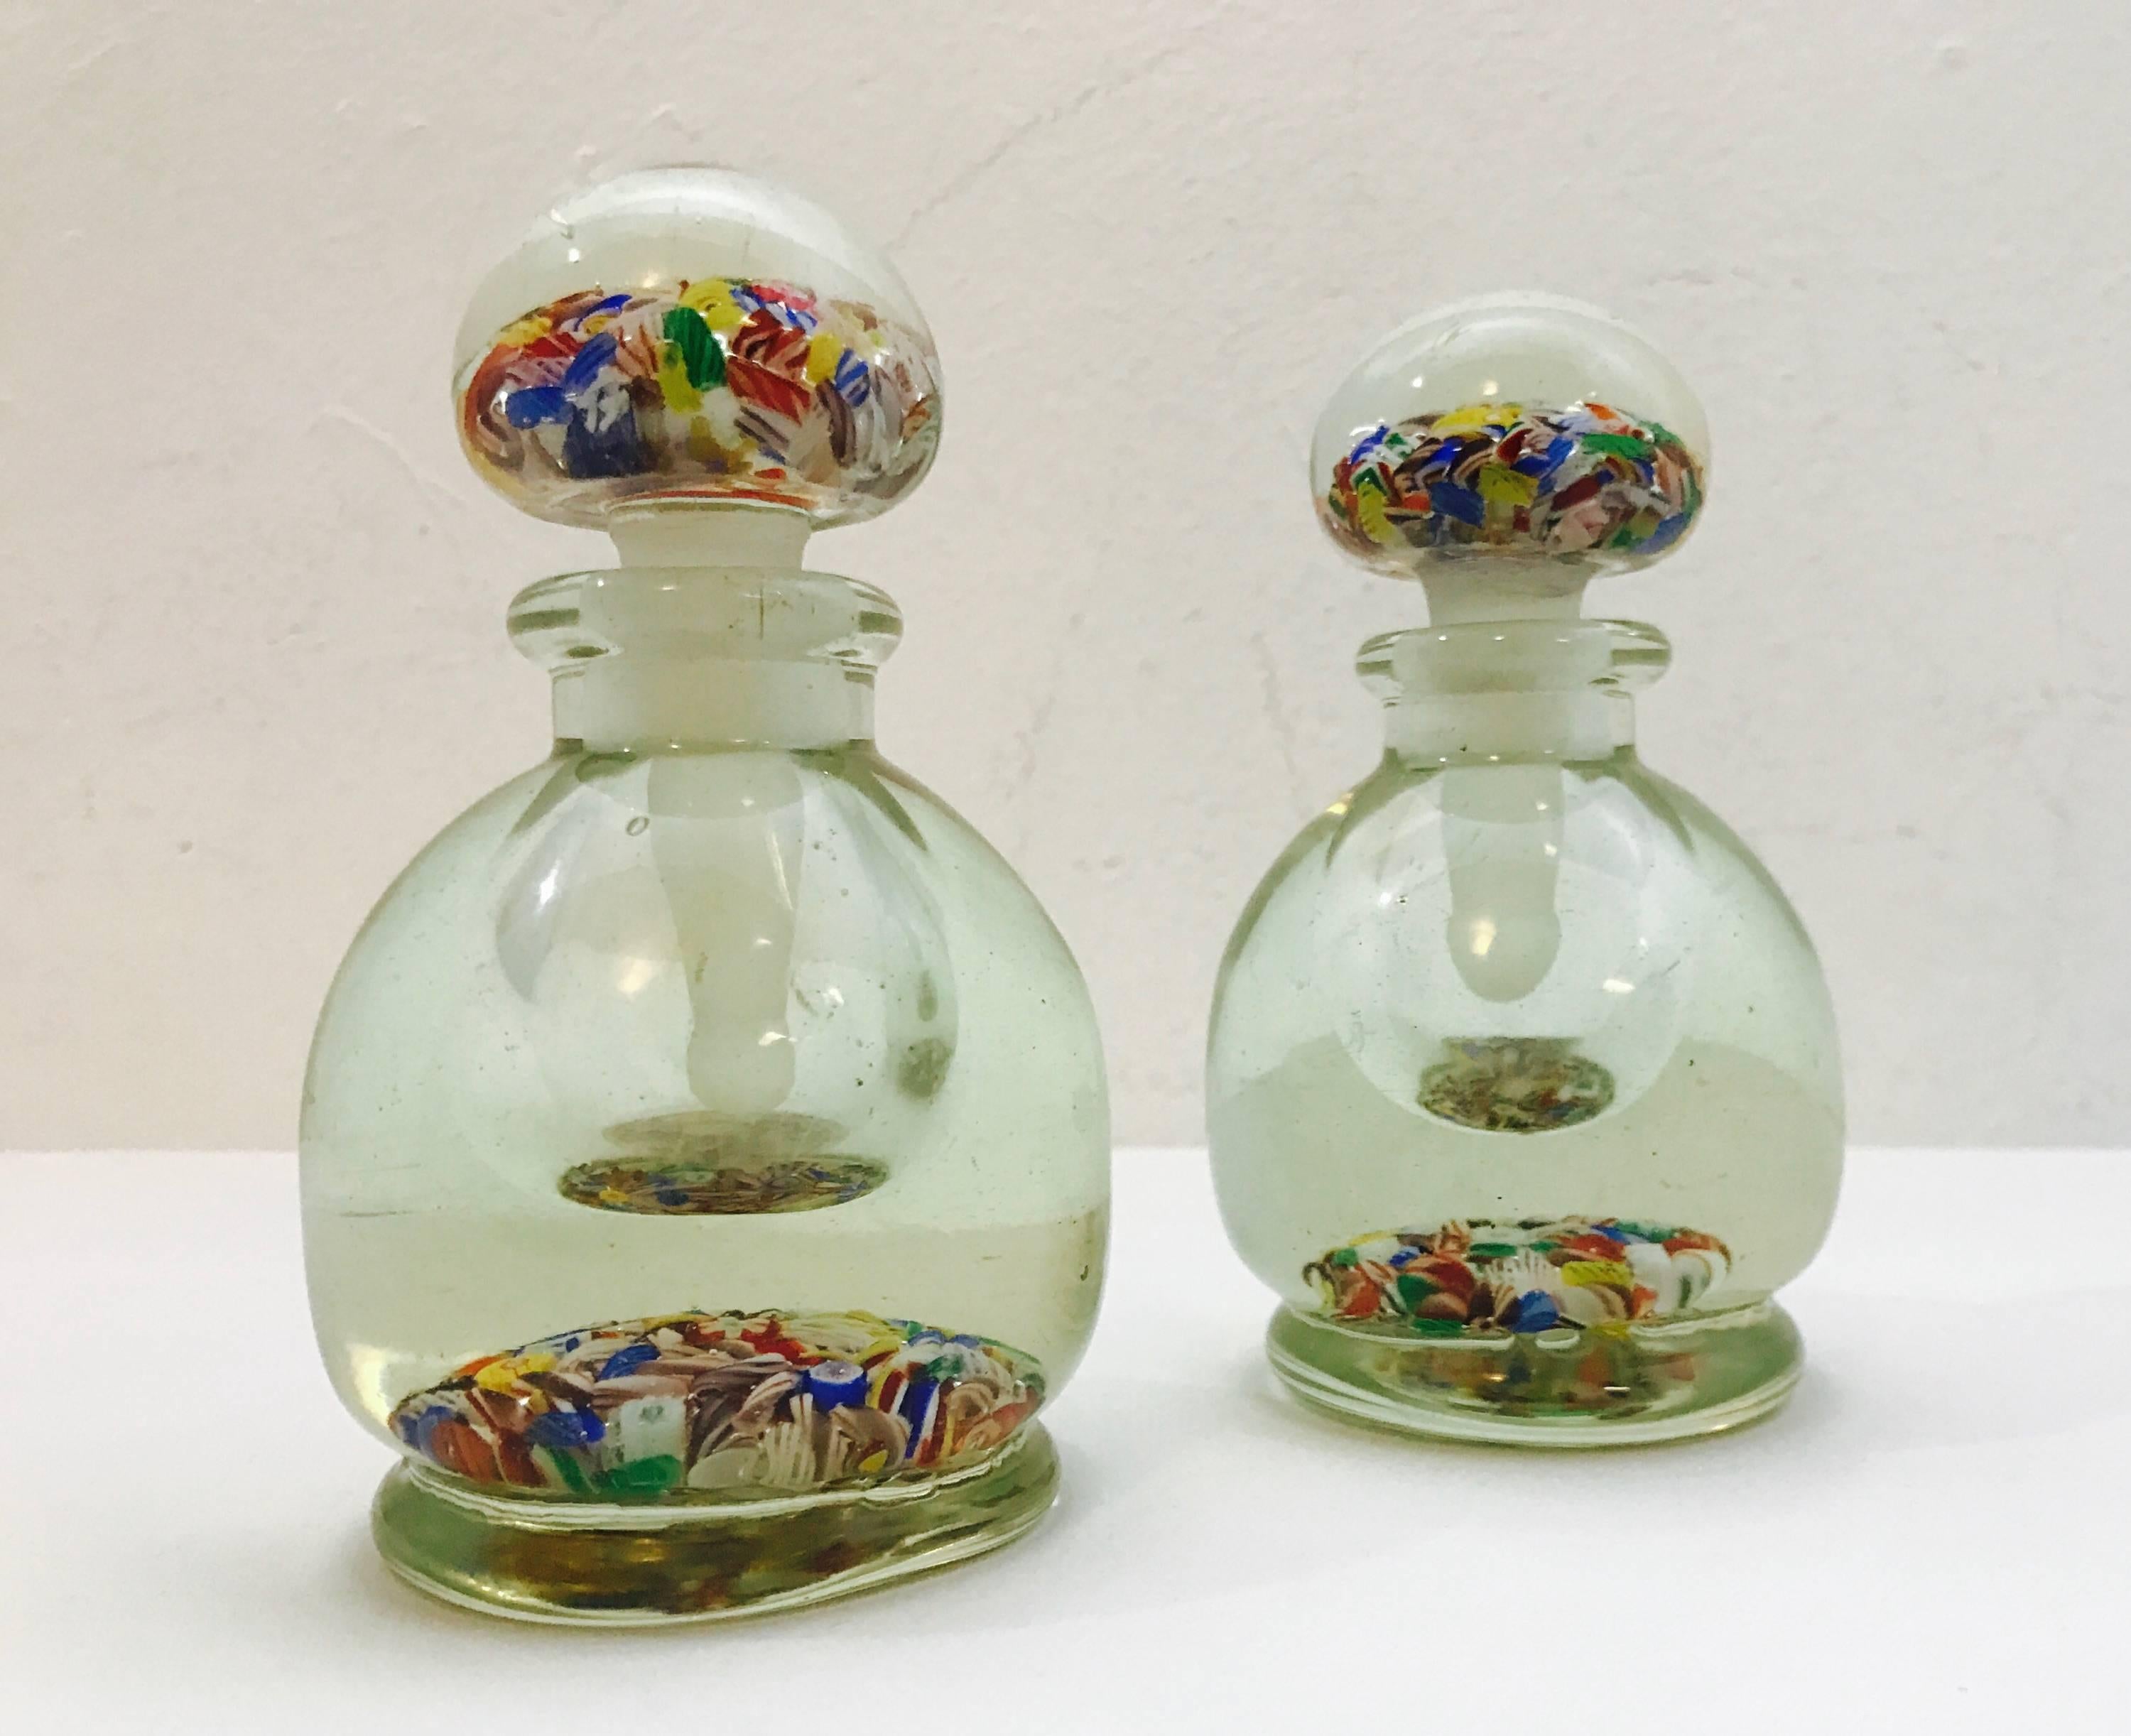 A wonderful vintage lidded bottle made in the style of Italian millefiore glass, which is an art form using rods of coloured glass that are cut into decorative shapes and encased in clear glass.  China created some excellent millefiore at the turn